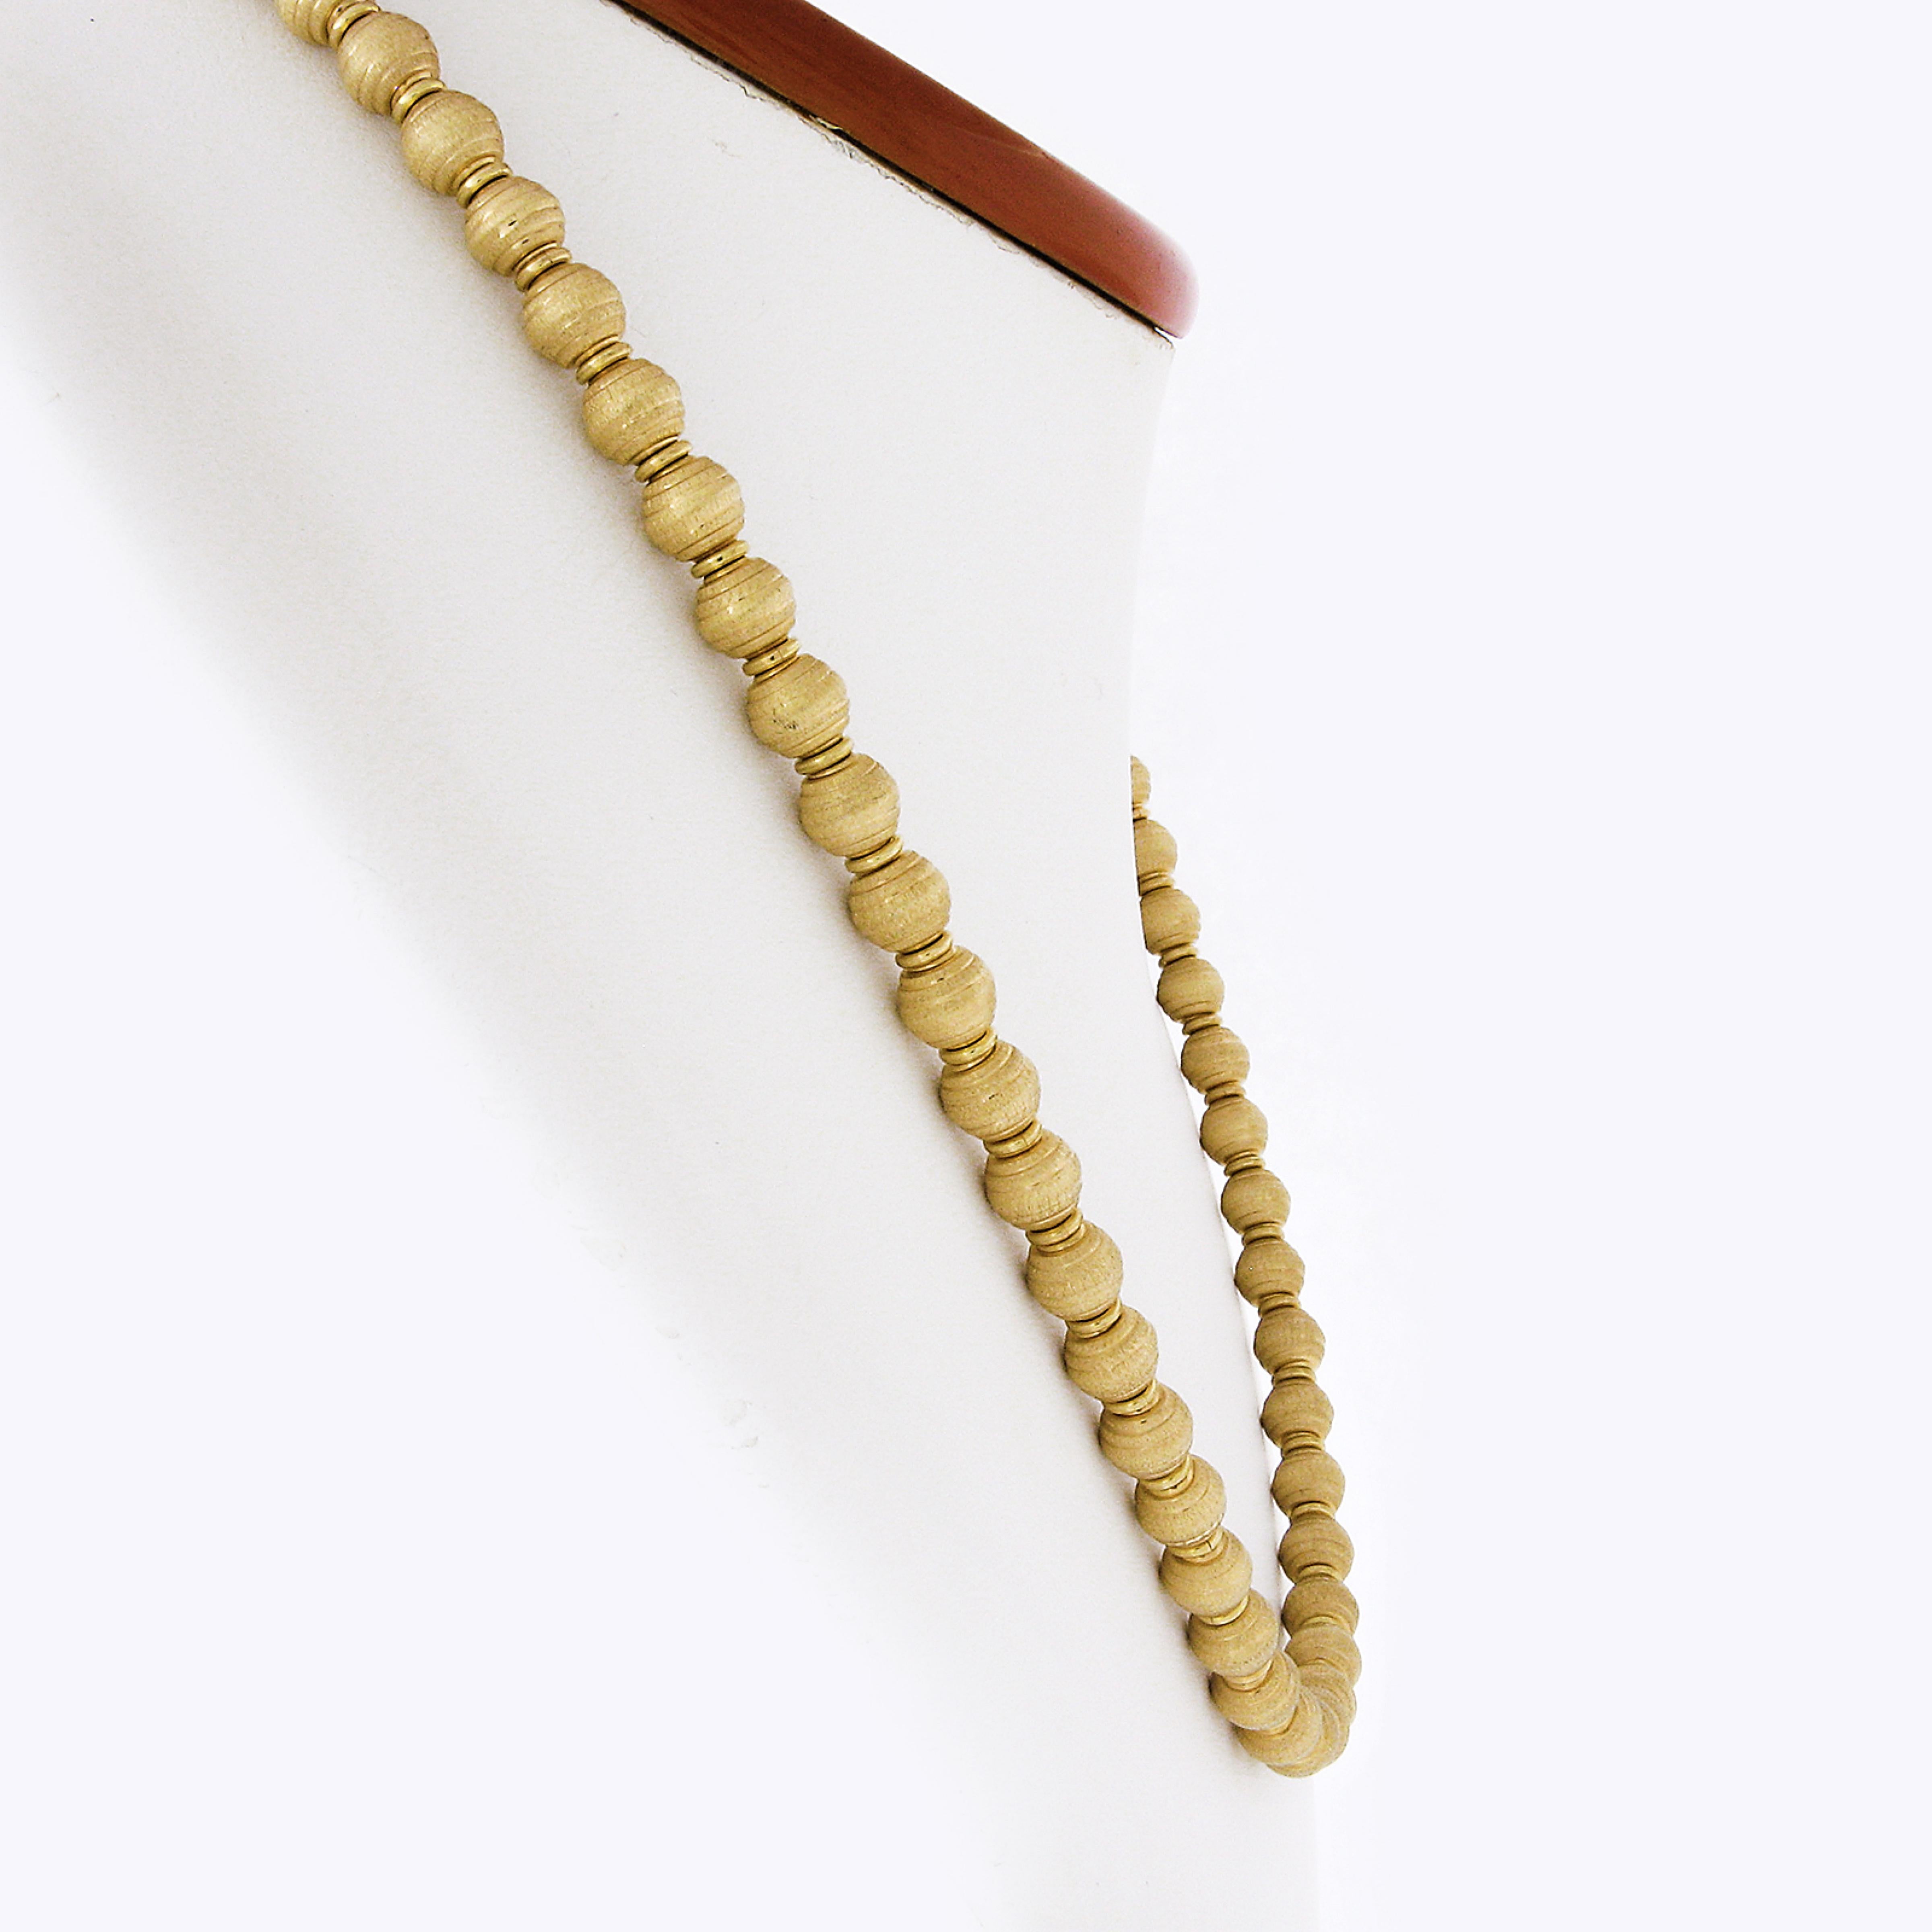 Here we have an absolutely gorgeous necklace that was crafted in Italy from solid 18k yellow gold. This very well made piece features 6mm ball beads that are completely covered with a lovely brushed finish throughout. The brushed texture finish